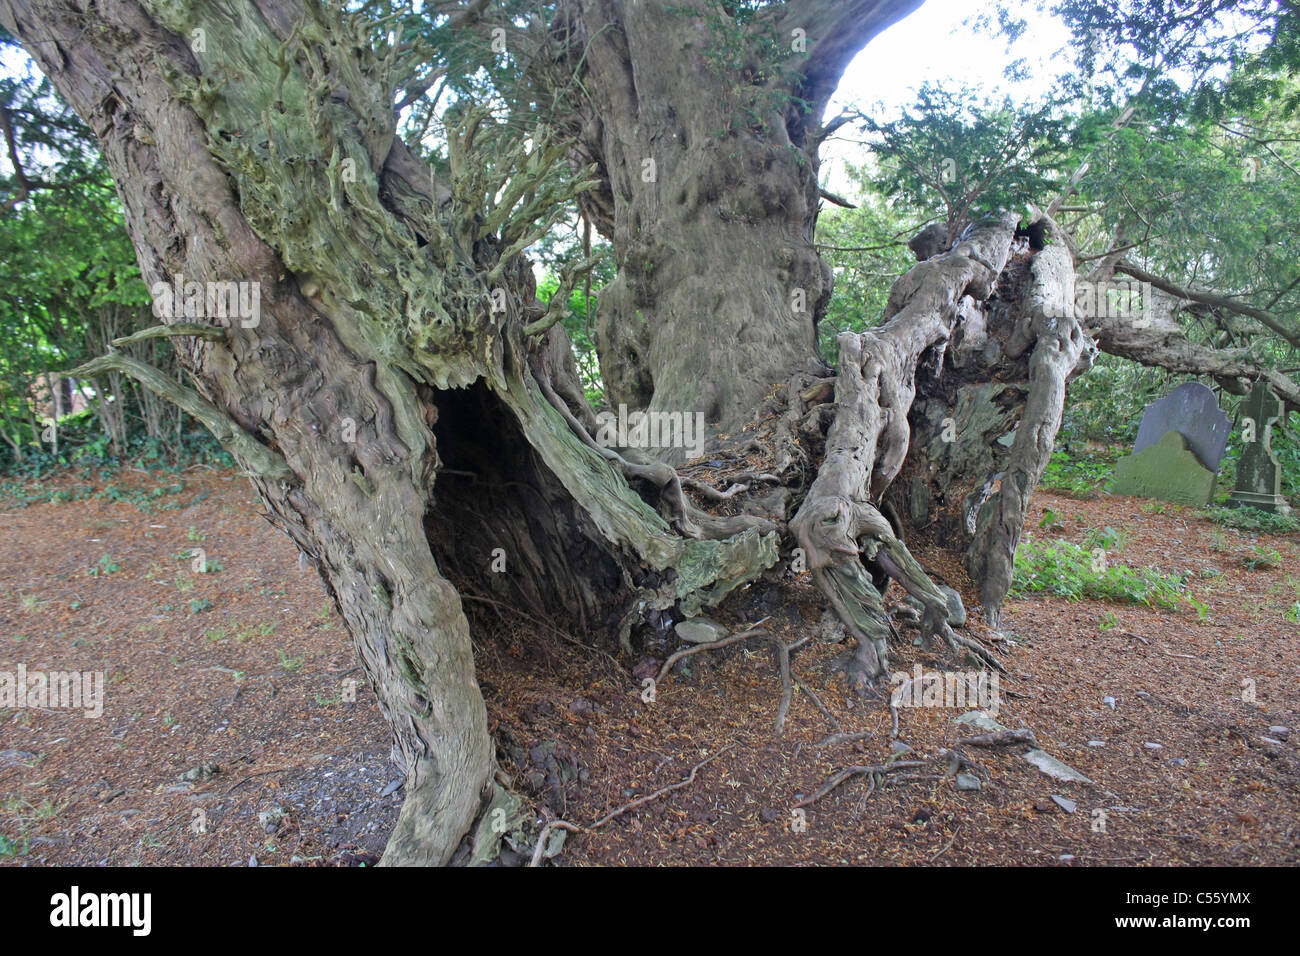 Yew tree in St Digain's churchyard in Wales Stock Photo